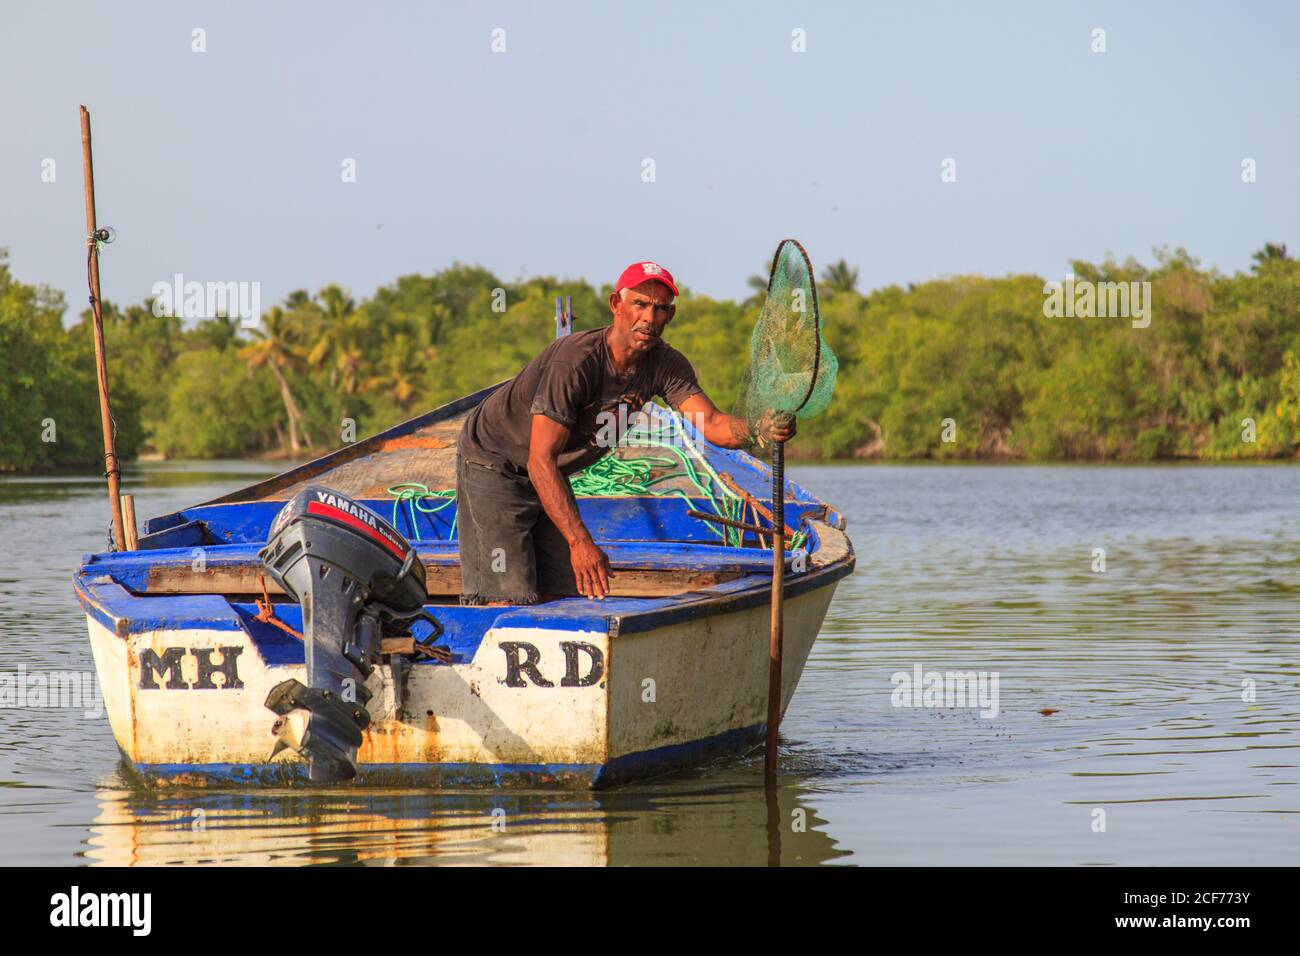 Miches, El Seibo, Dominican Republic - May 23, 2015: Fisherman on his way out to sea to fish in Miches, Dominican Republic. Stock Photo